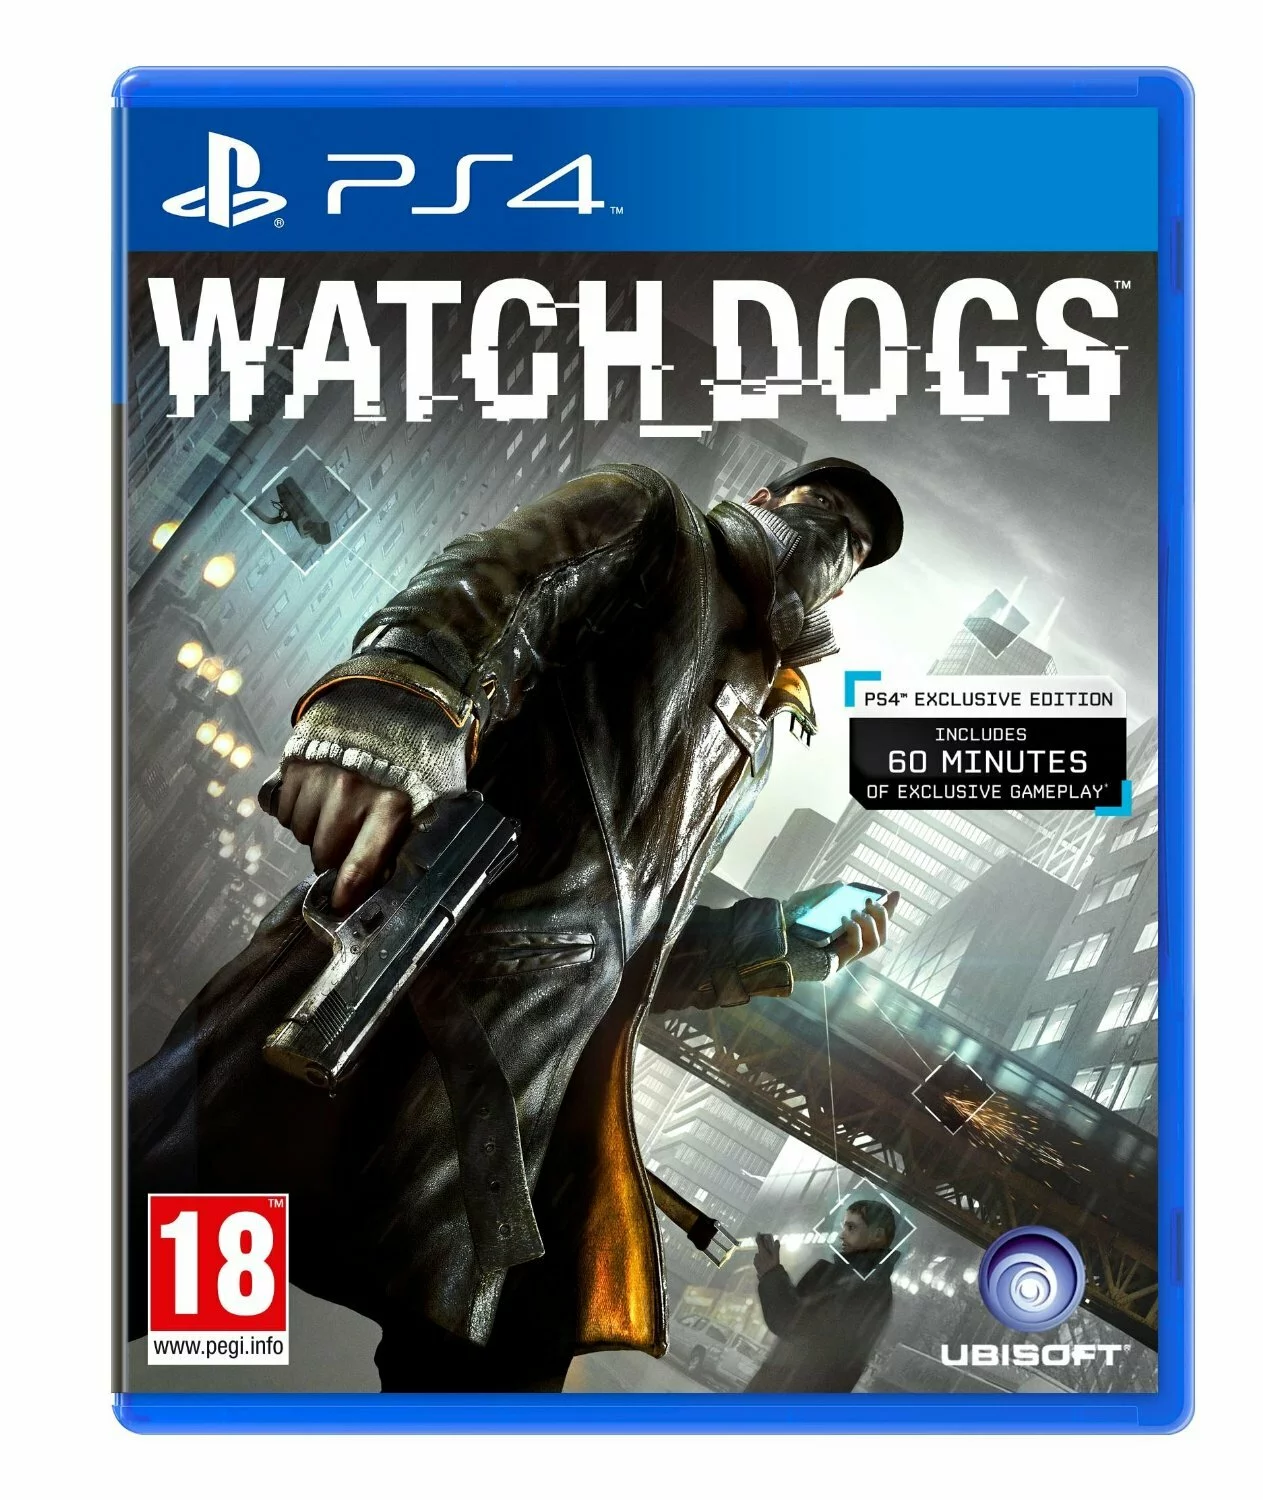 WATCHDOGS_PS4